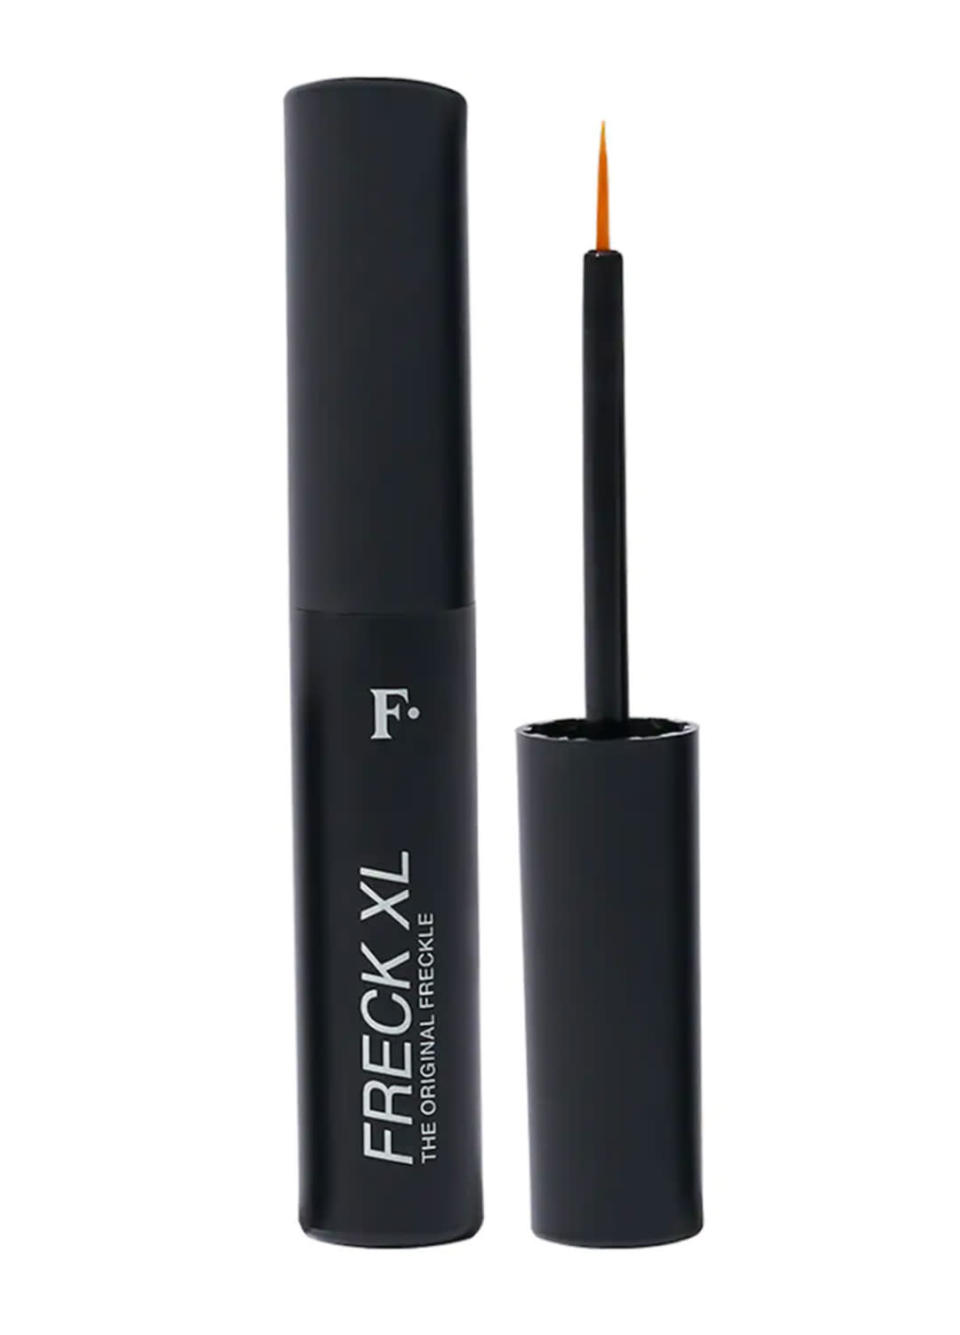 <p>No freckles? No problem! TikTok went crazy over this product that lets your draw freckles on your face yourself. </p> <p><strong>Buy It! </strong>Freck The Original Freckle; $28, <a href="https://click.linksynergy.com/deeplink?id=93xLBvPhAeE&mid=2417&murl=https%3A%2F%2Fwww.sephora.com%2Fproduct%2Ffreck-beauty-freck-og-the-original-P468653&u1=PEOHolidayGiftGuide2021ViralTikTokProductsThatMakethePerfectGiftsawurzburLifGal13017801202111I" rel="sponsored noopener" target="_blank" data-ylk="slk:Sephora.com" class="link rapid-noclick-resp">Sephora.com</a>Sephora.com</p>